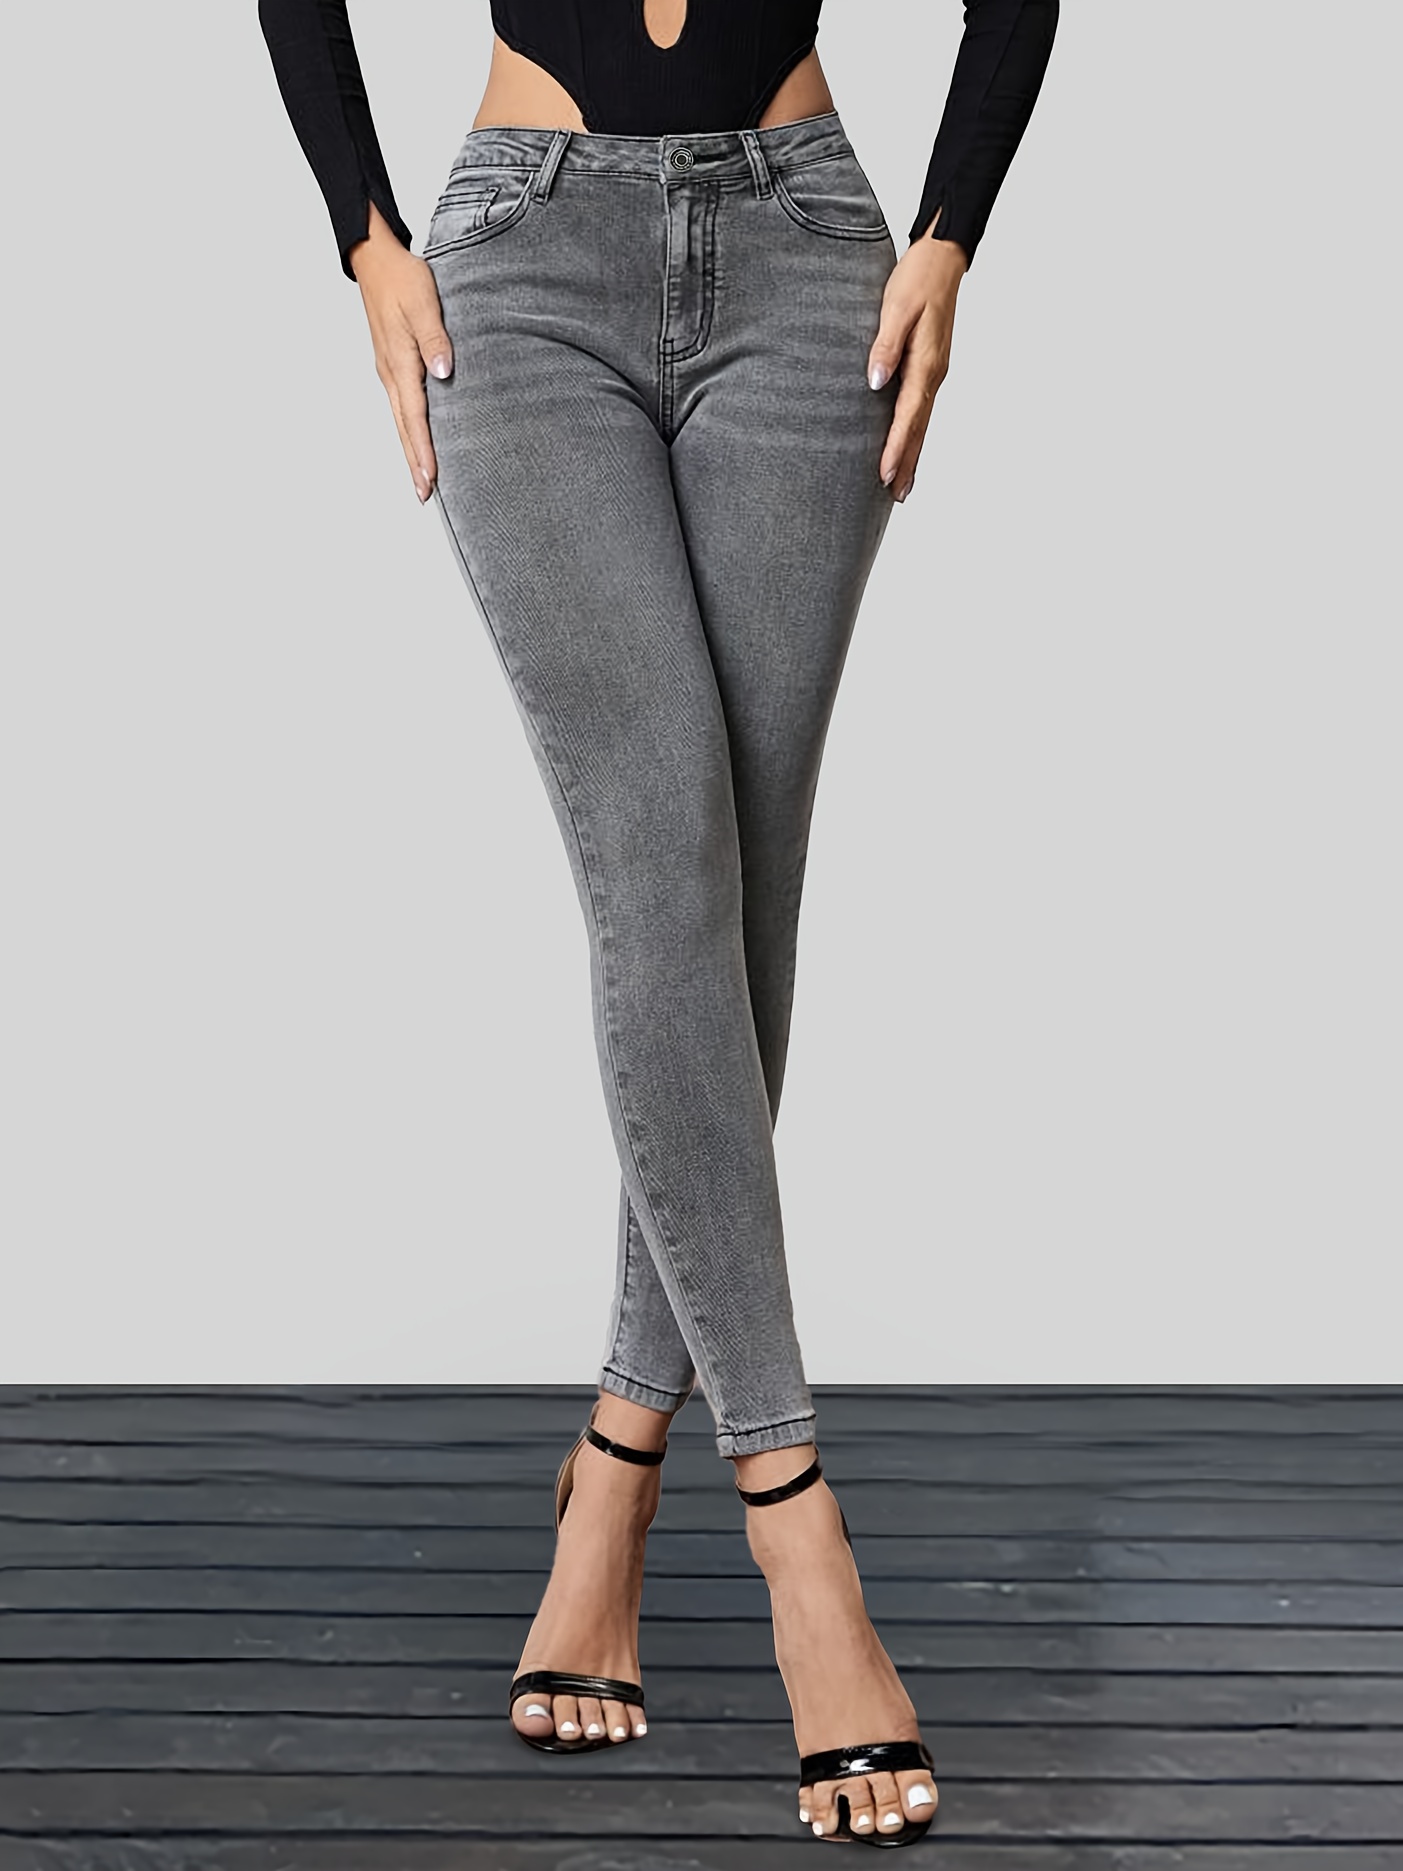 High Waist GREY DENIM POCKET JEGGINGS, Casual Wear, Skinny Fit at Rs 285 in  Ahmedabad